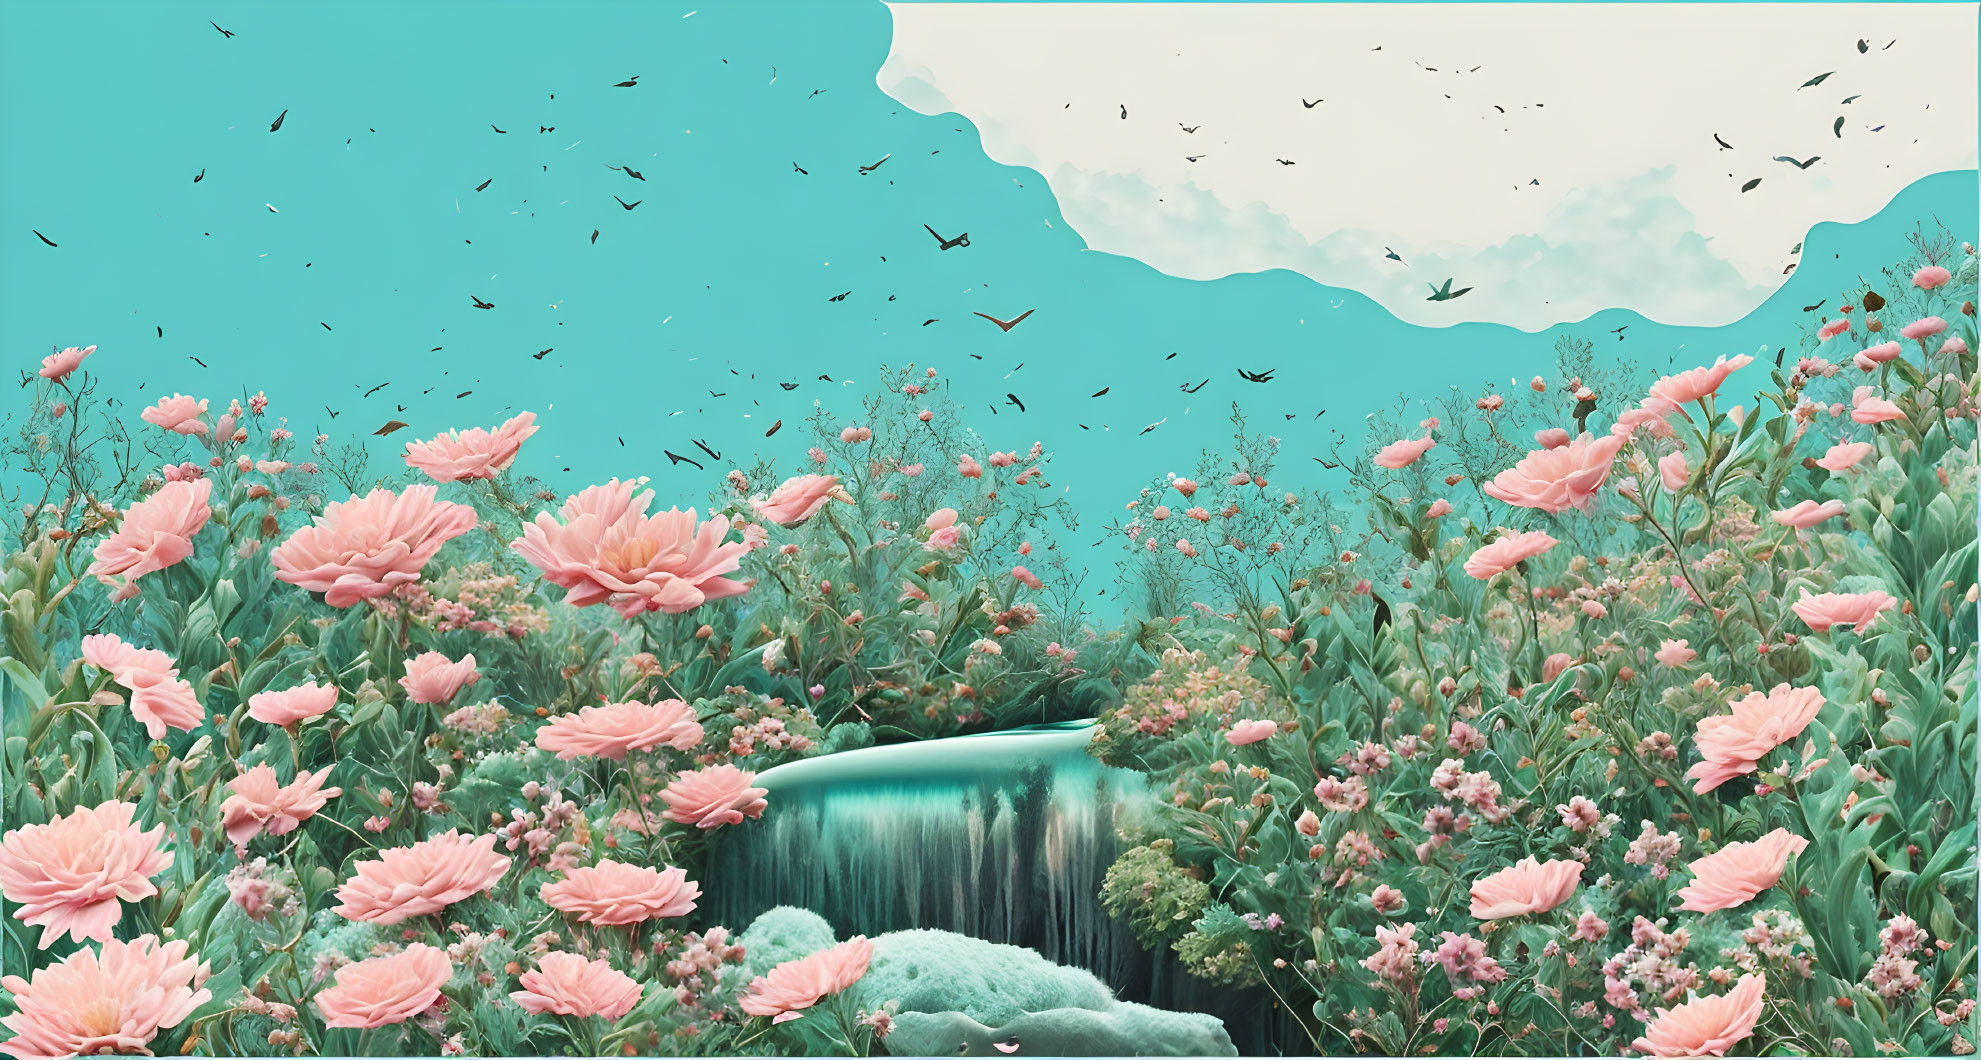 Tranquil digital artwork of lush waterfall and pink flowers